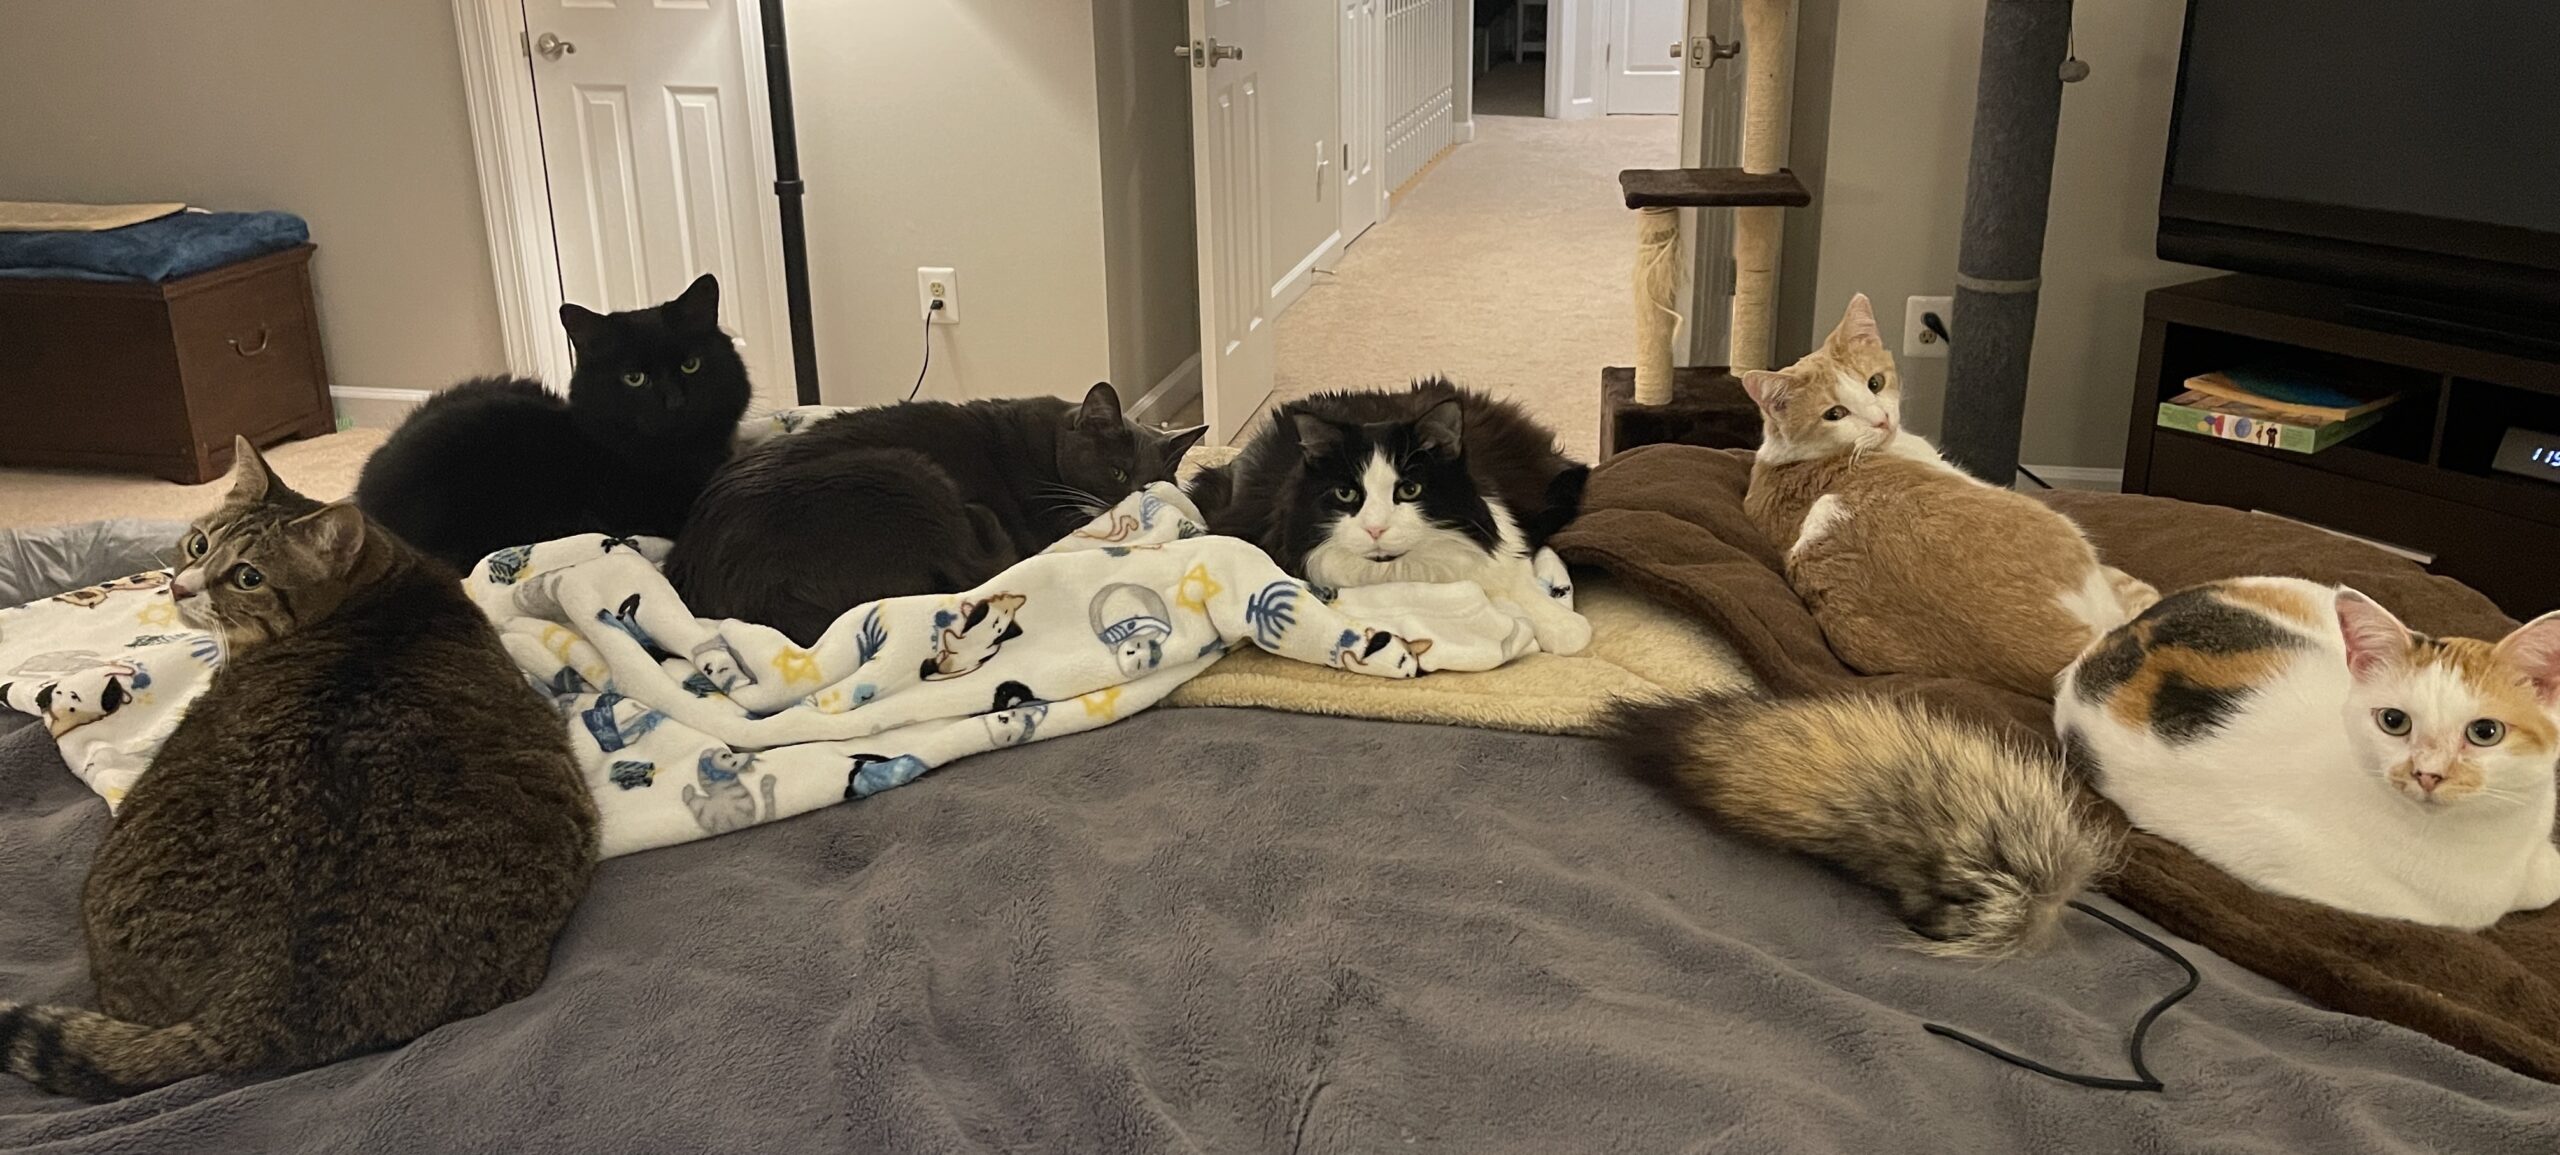 https://www.askamanager.org/wp-content/uploads/2023/10/6-cats-on-bed-2023-scaled.jpg